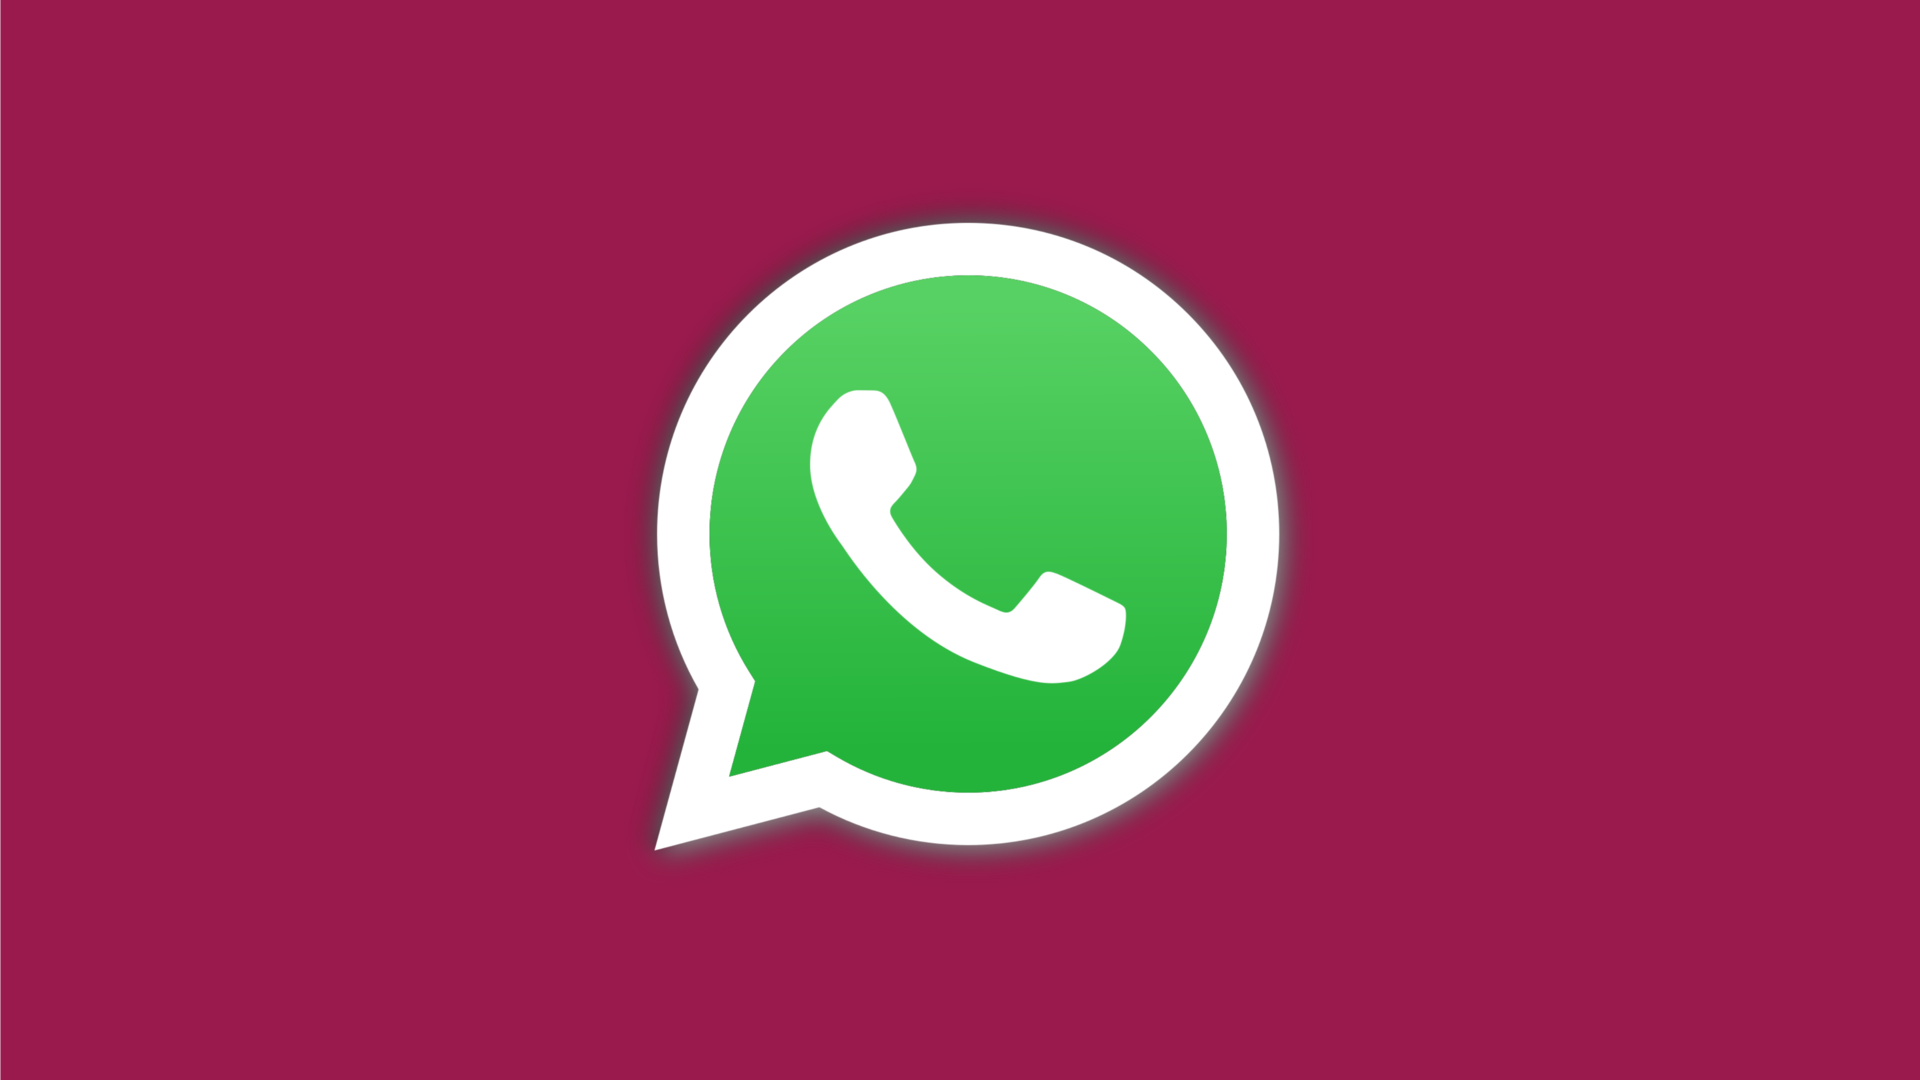 Latest WhatsApp updates: Picture-in-picture for iOS, 21 emojis for Android